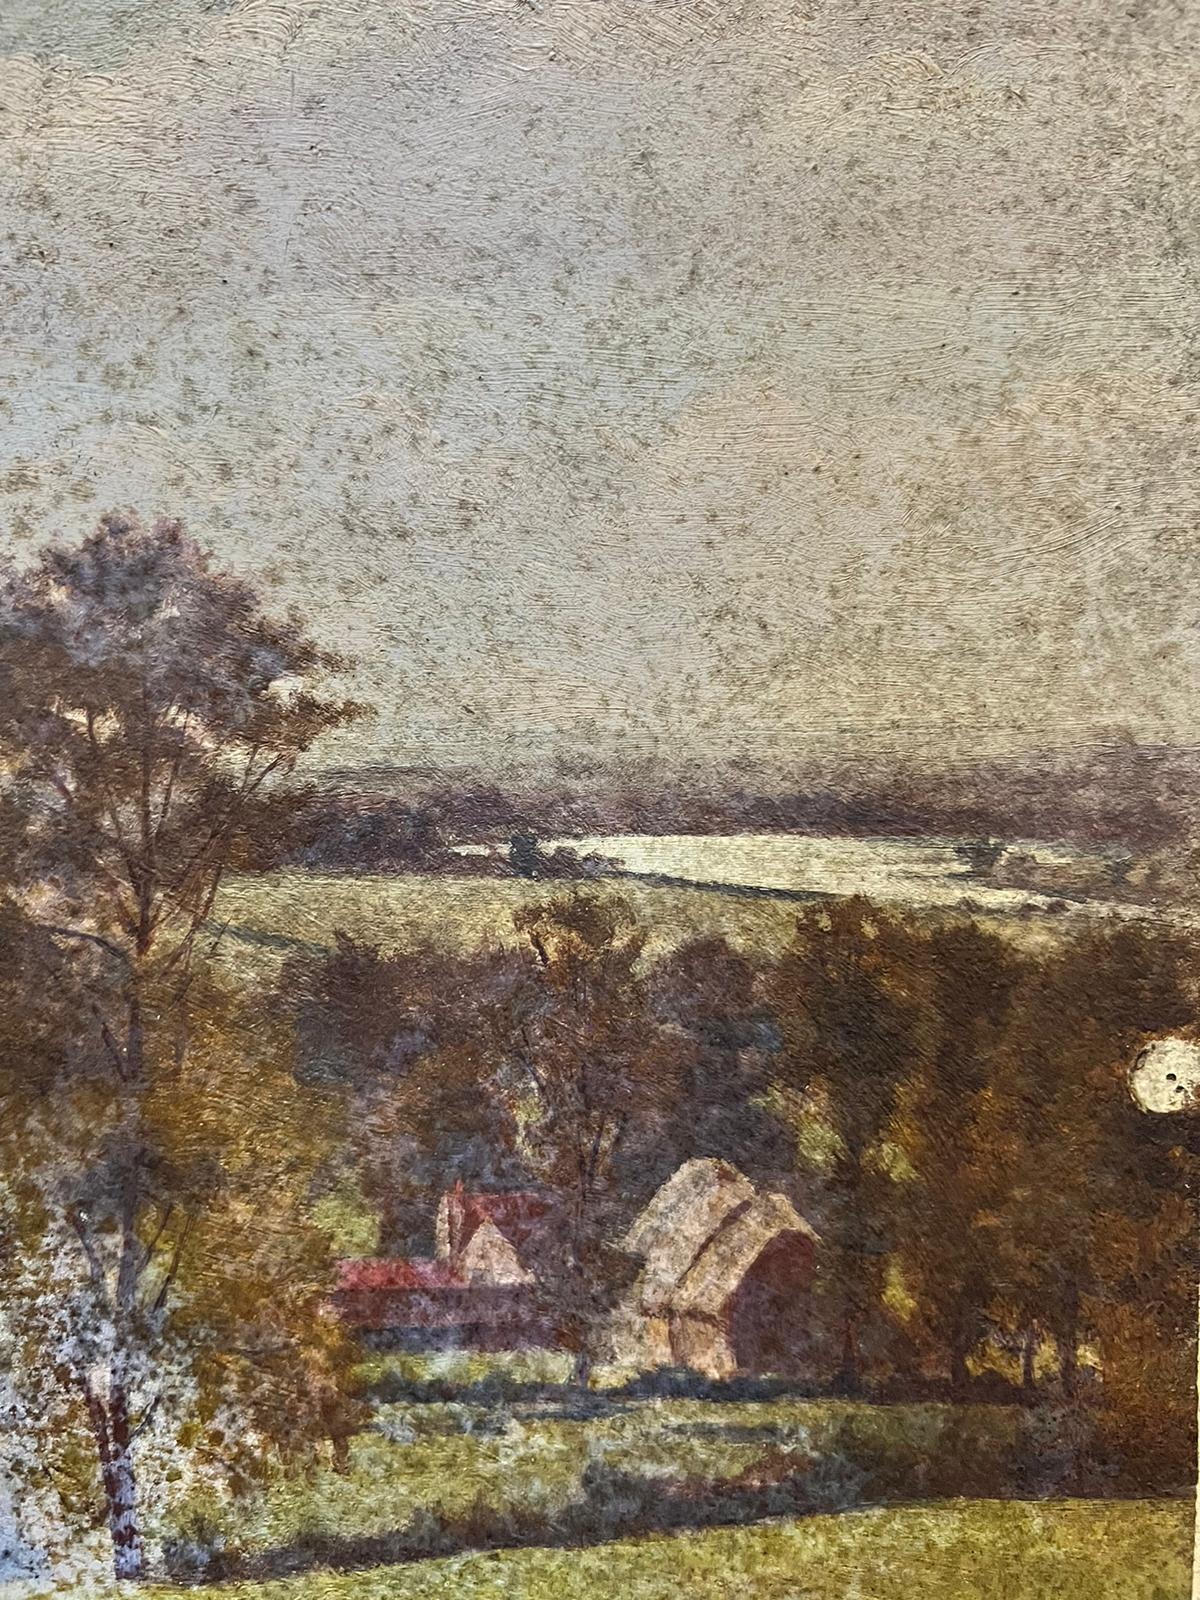 Artist/ School: English School, late 19th/ early 20th century.
The painting came from a large collection of works by one artist. A very few of them are signed what looks to be 'F. Wardle'. 

Title: Woodland Landscape

Medium: oil on thin board stuck